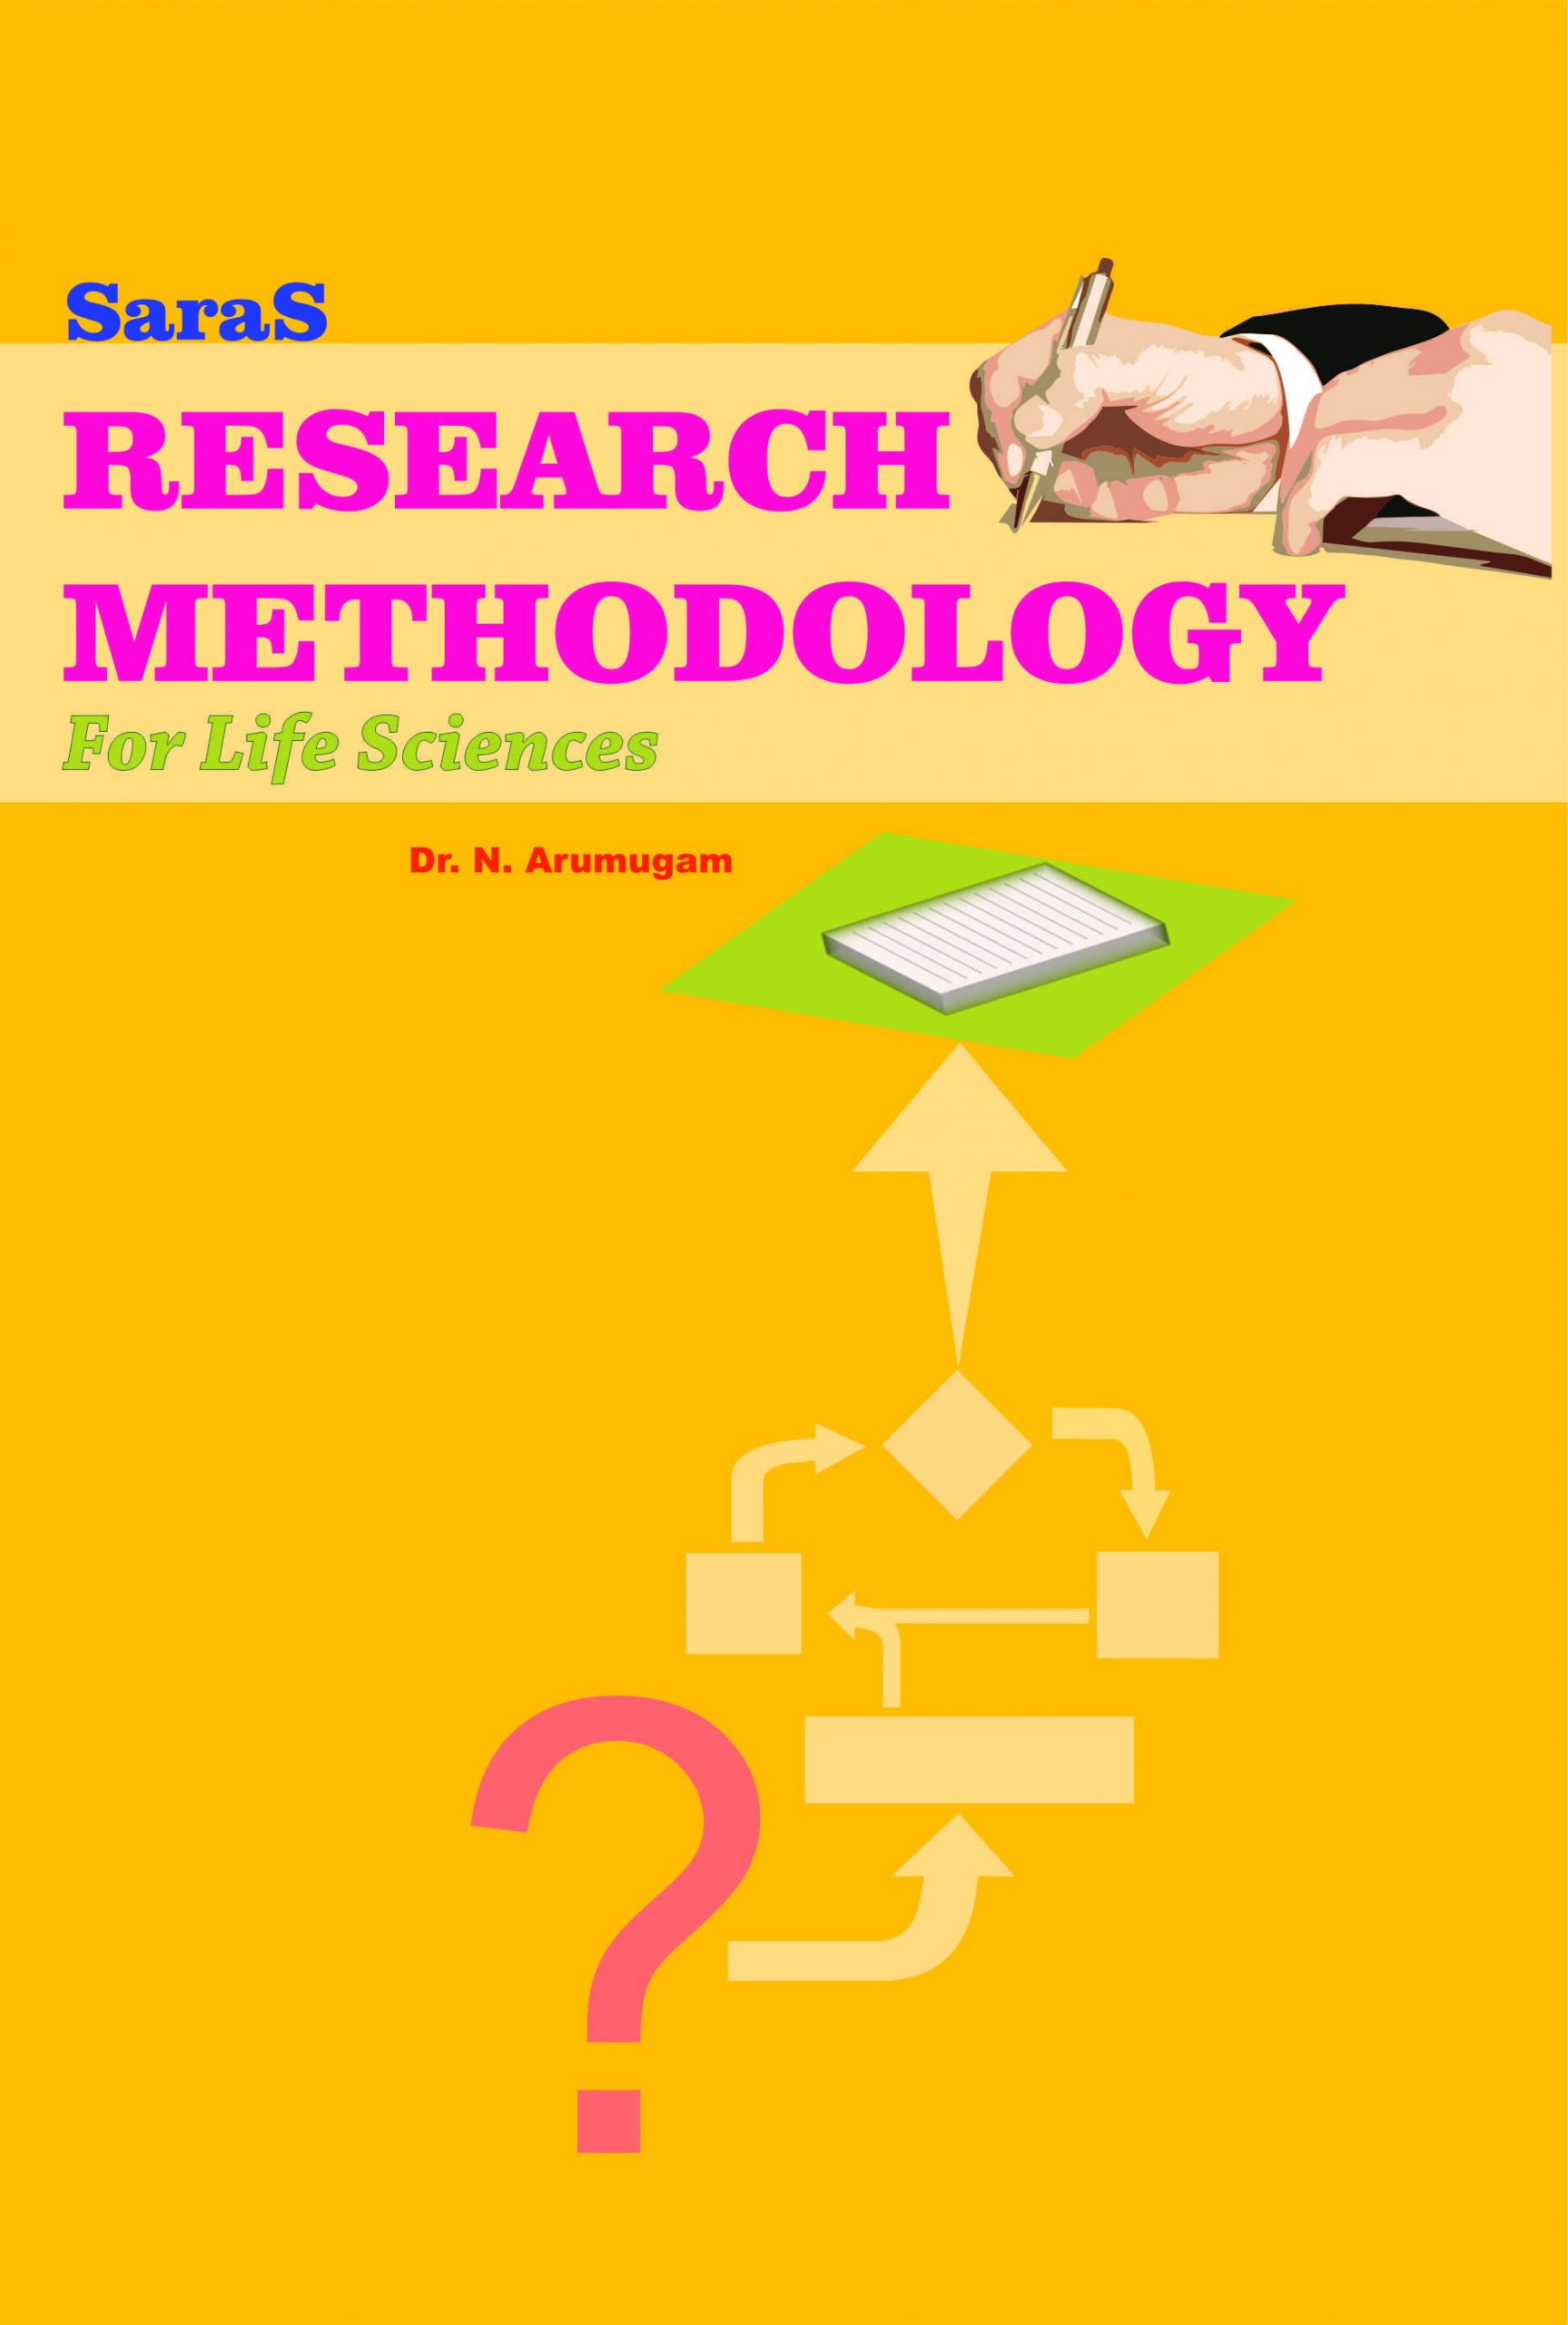 life science research topics pdf